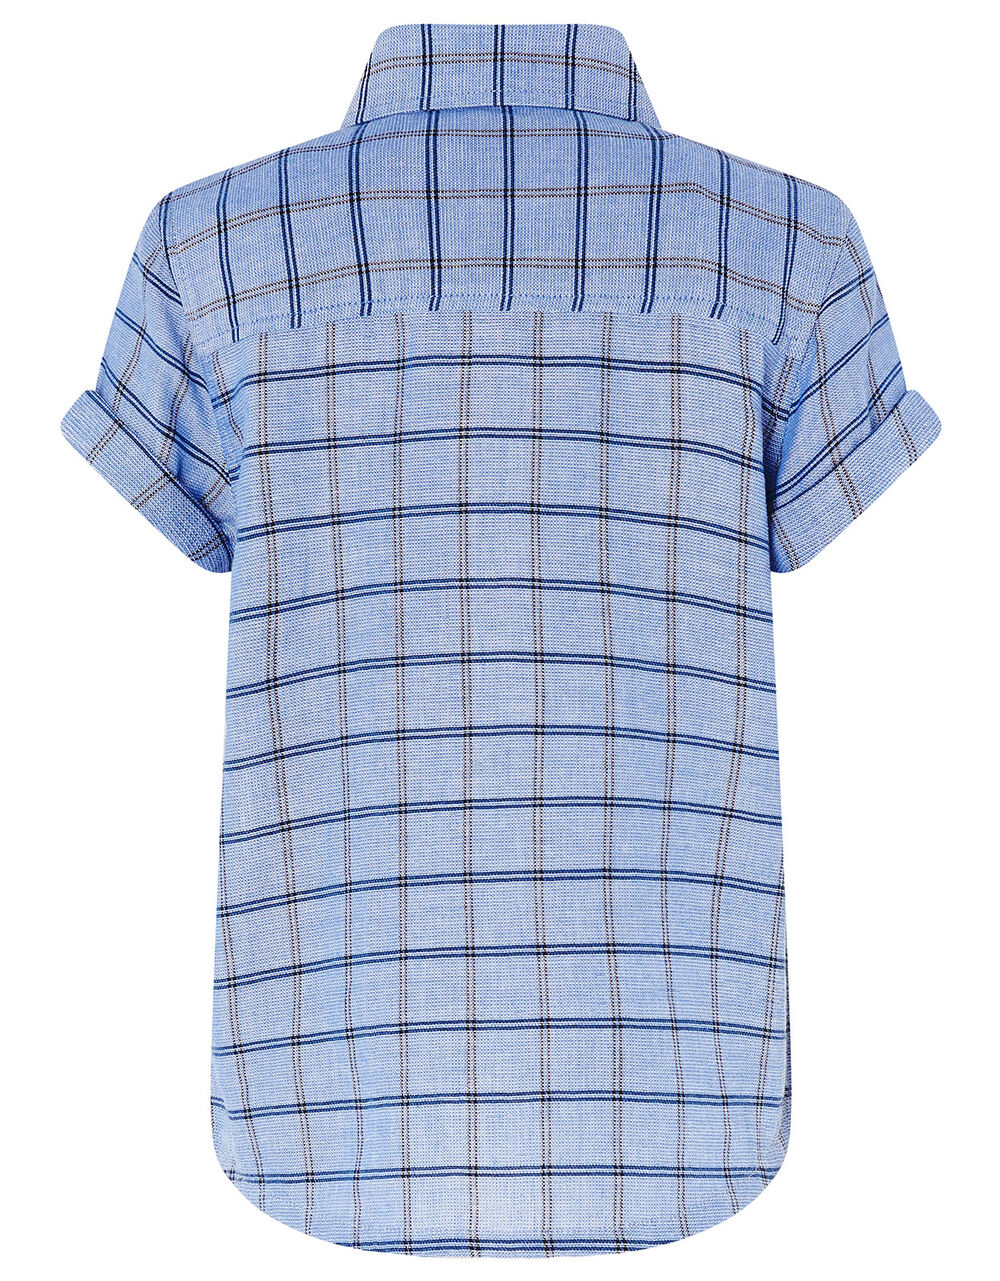 Check Short Sleeve Shirt in Pure Cotton Blue | Boys' Tops & T-shirts ...